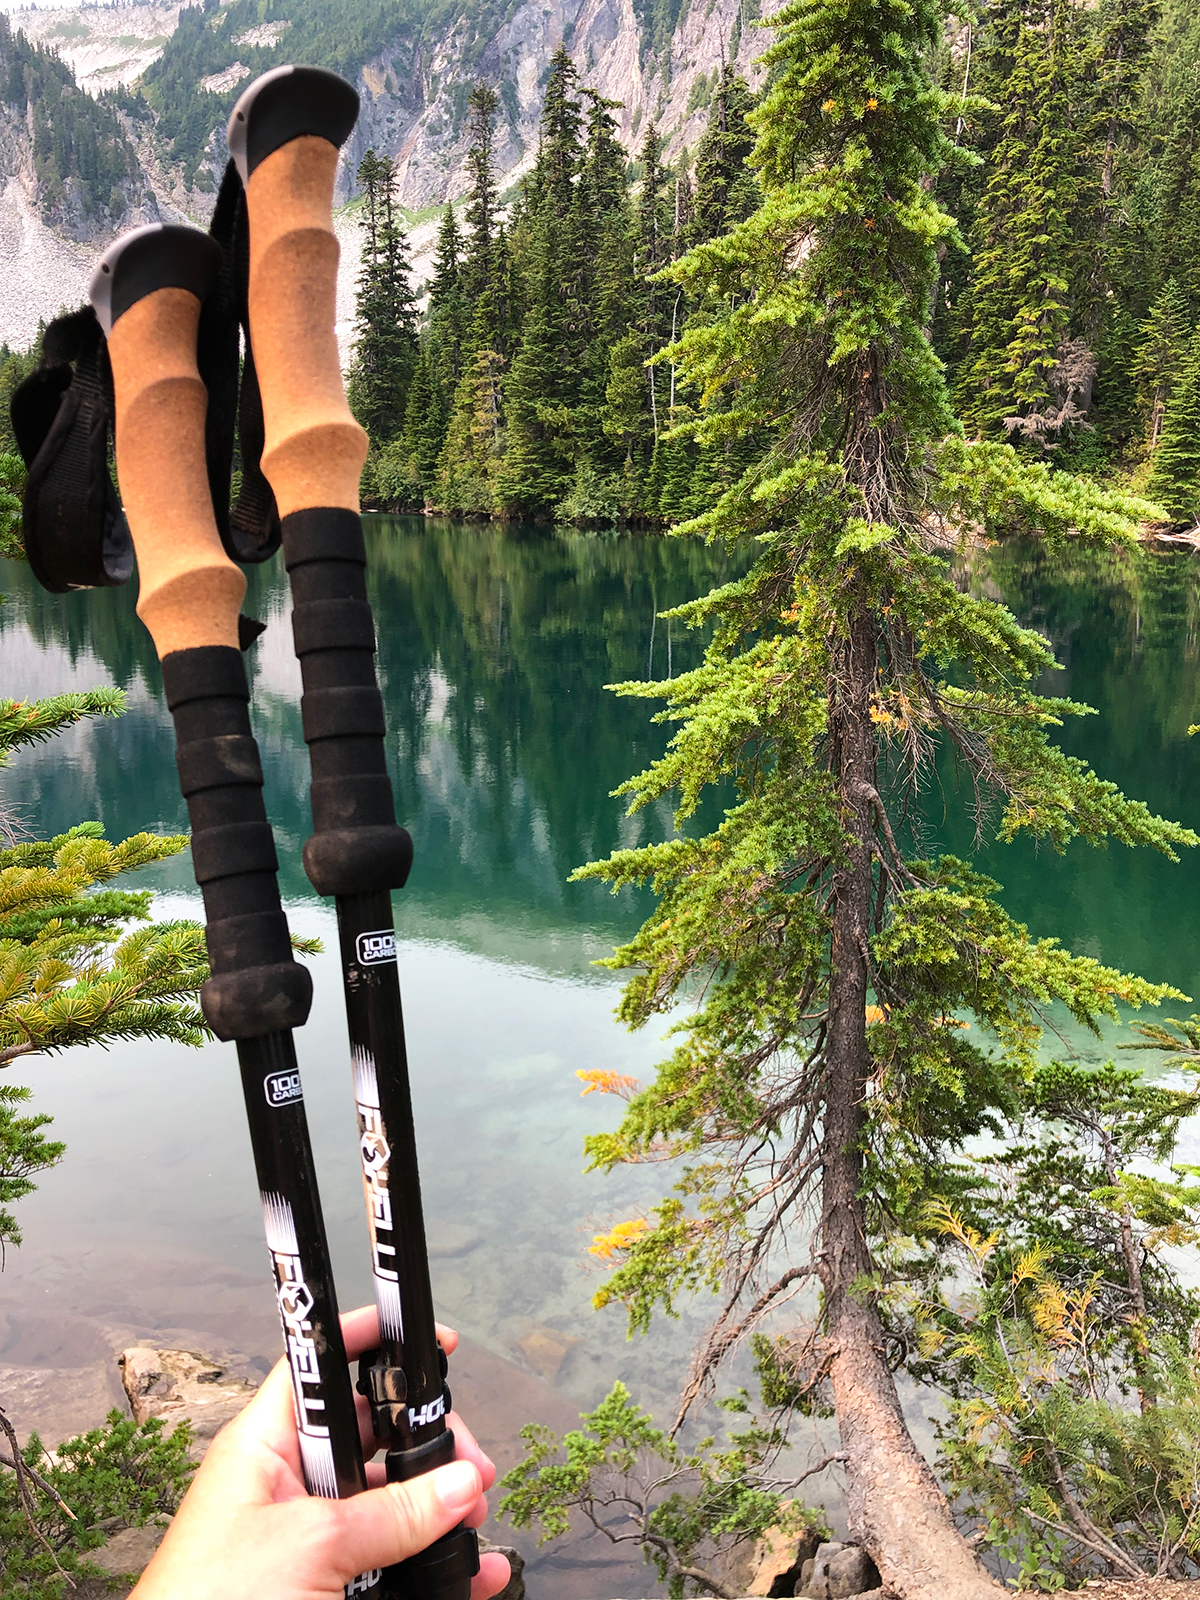 hiking poles close up with teal lake in background